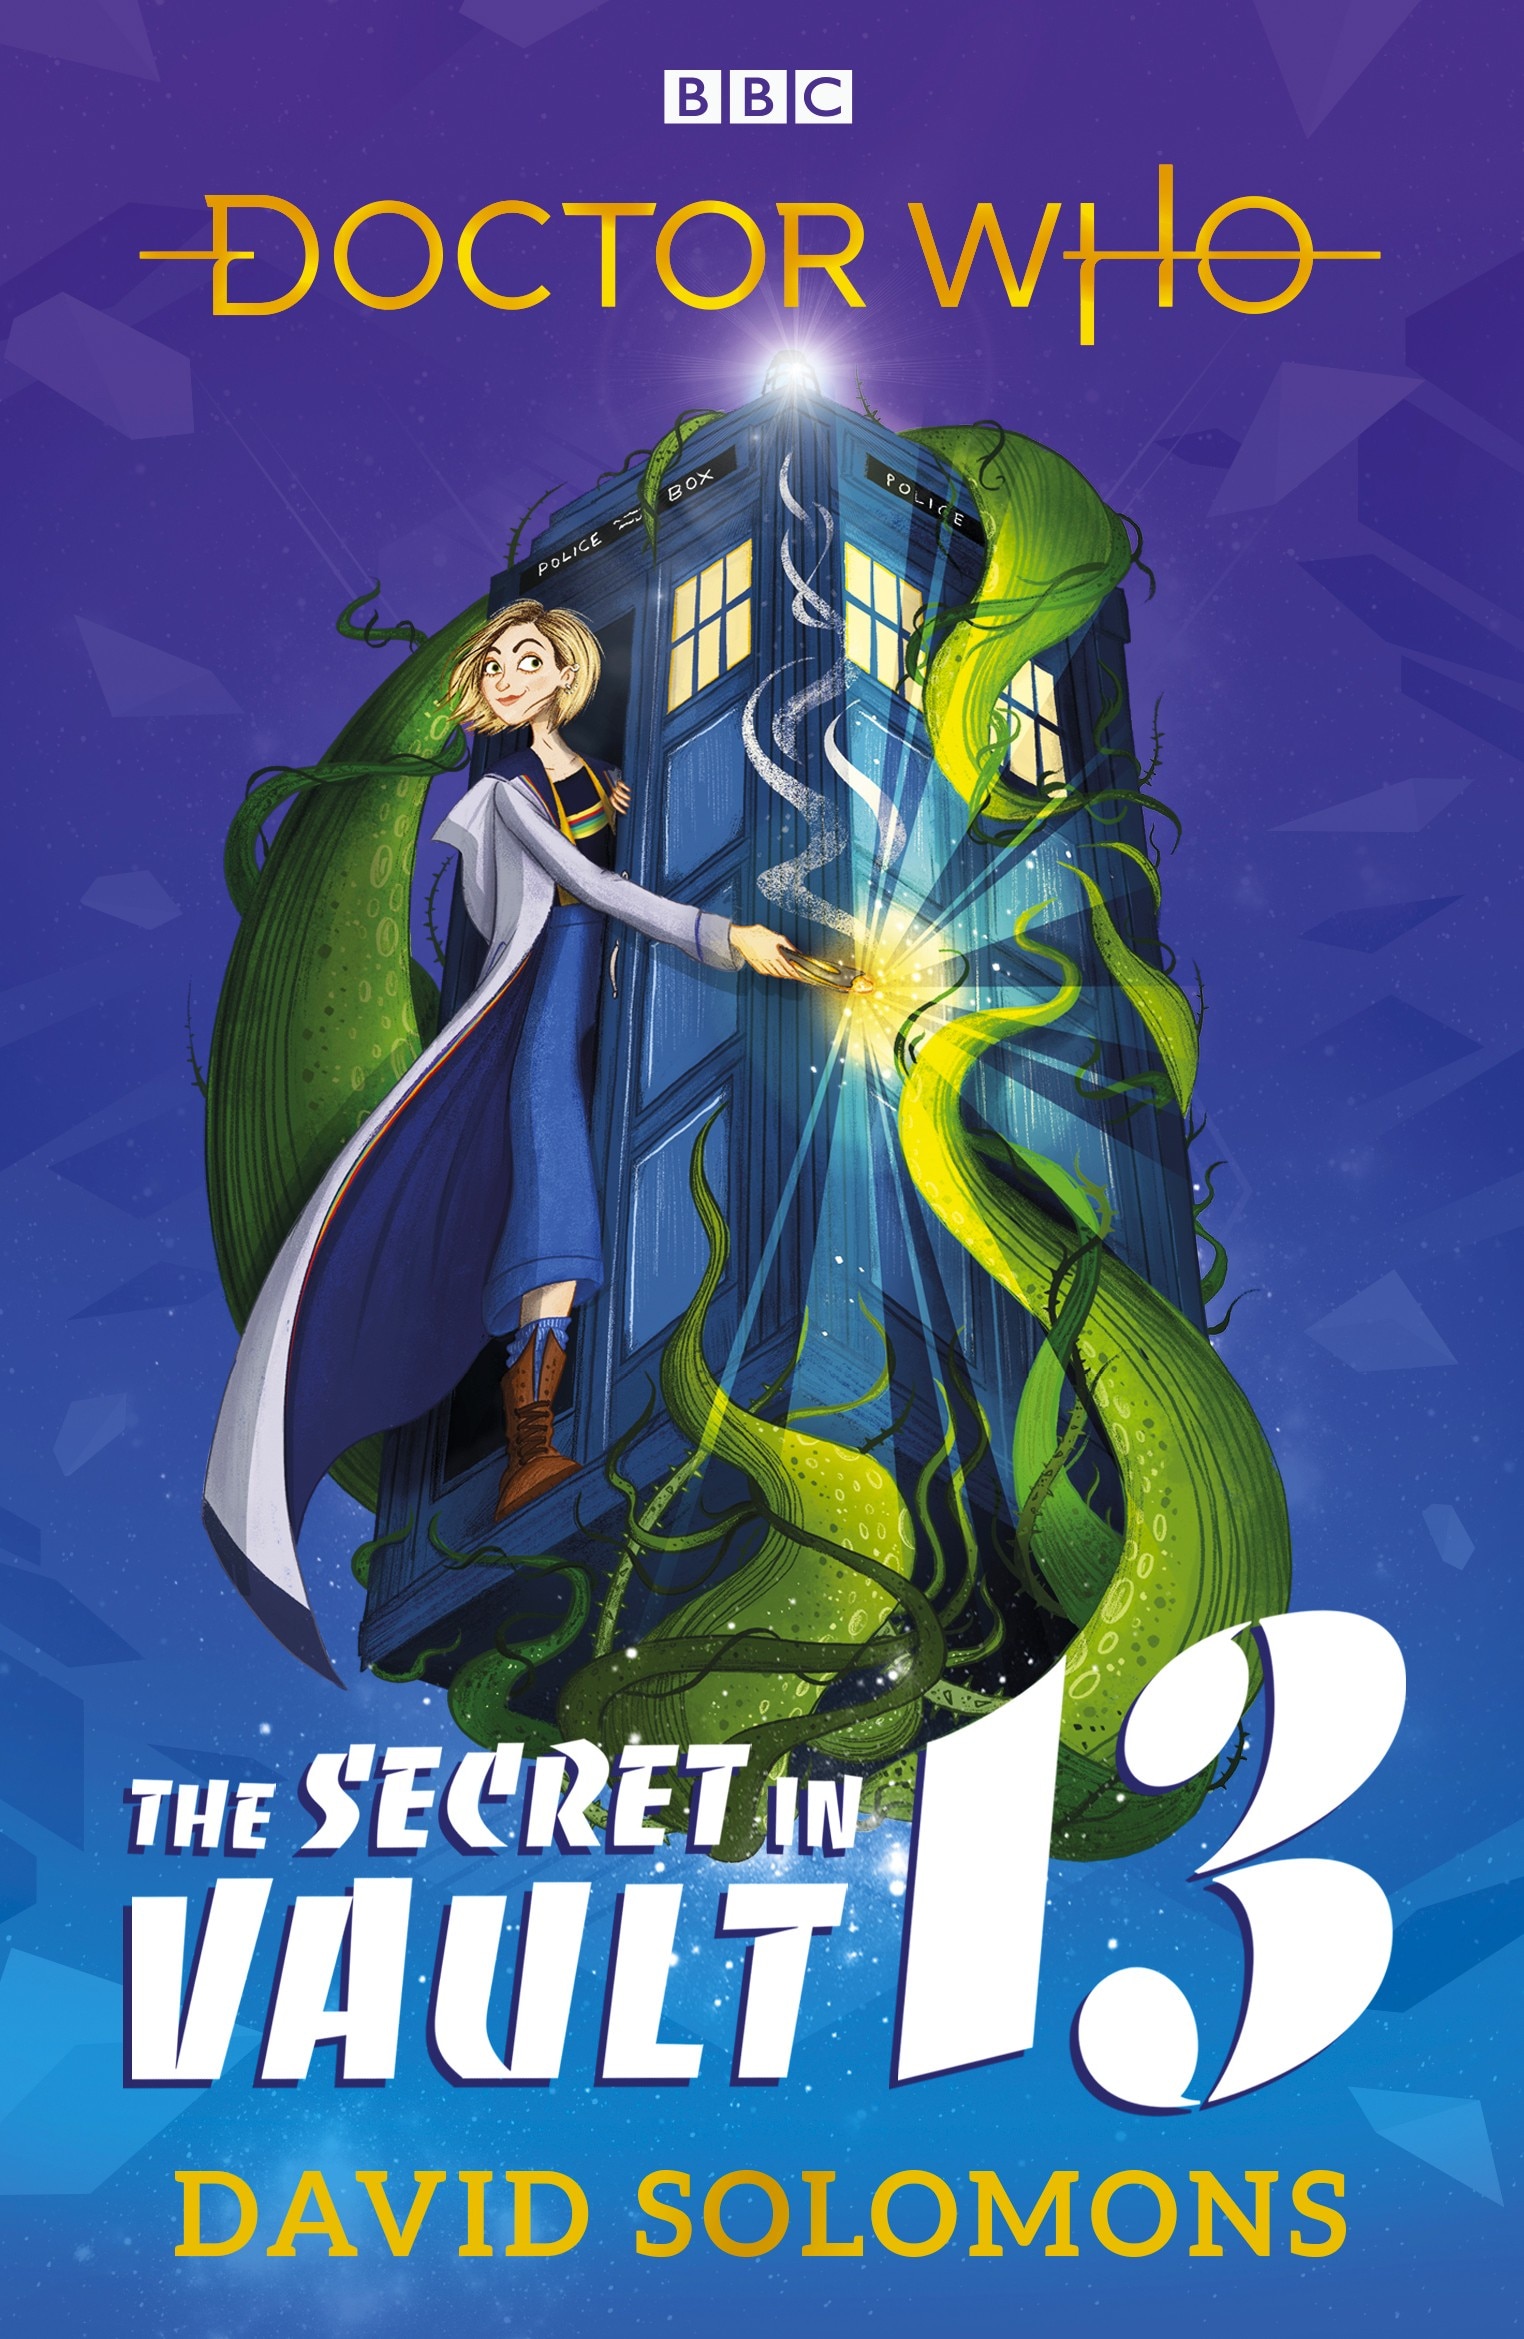 the cover of *the secret in vault 13* illustrated by laura ellen anderson